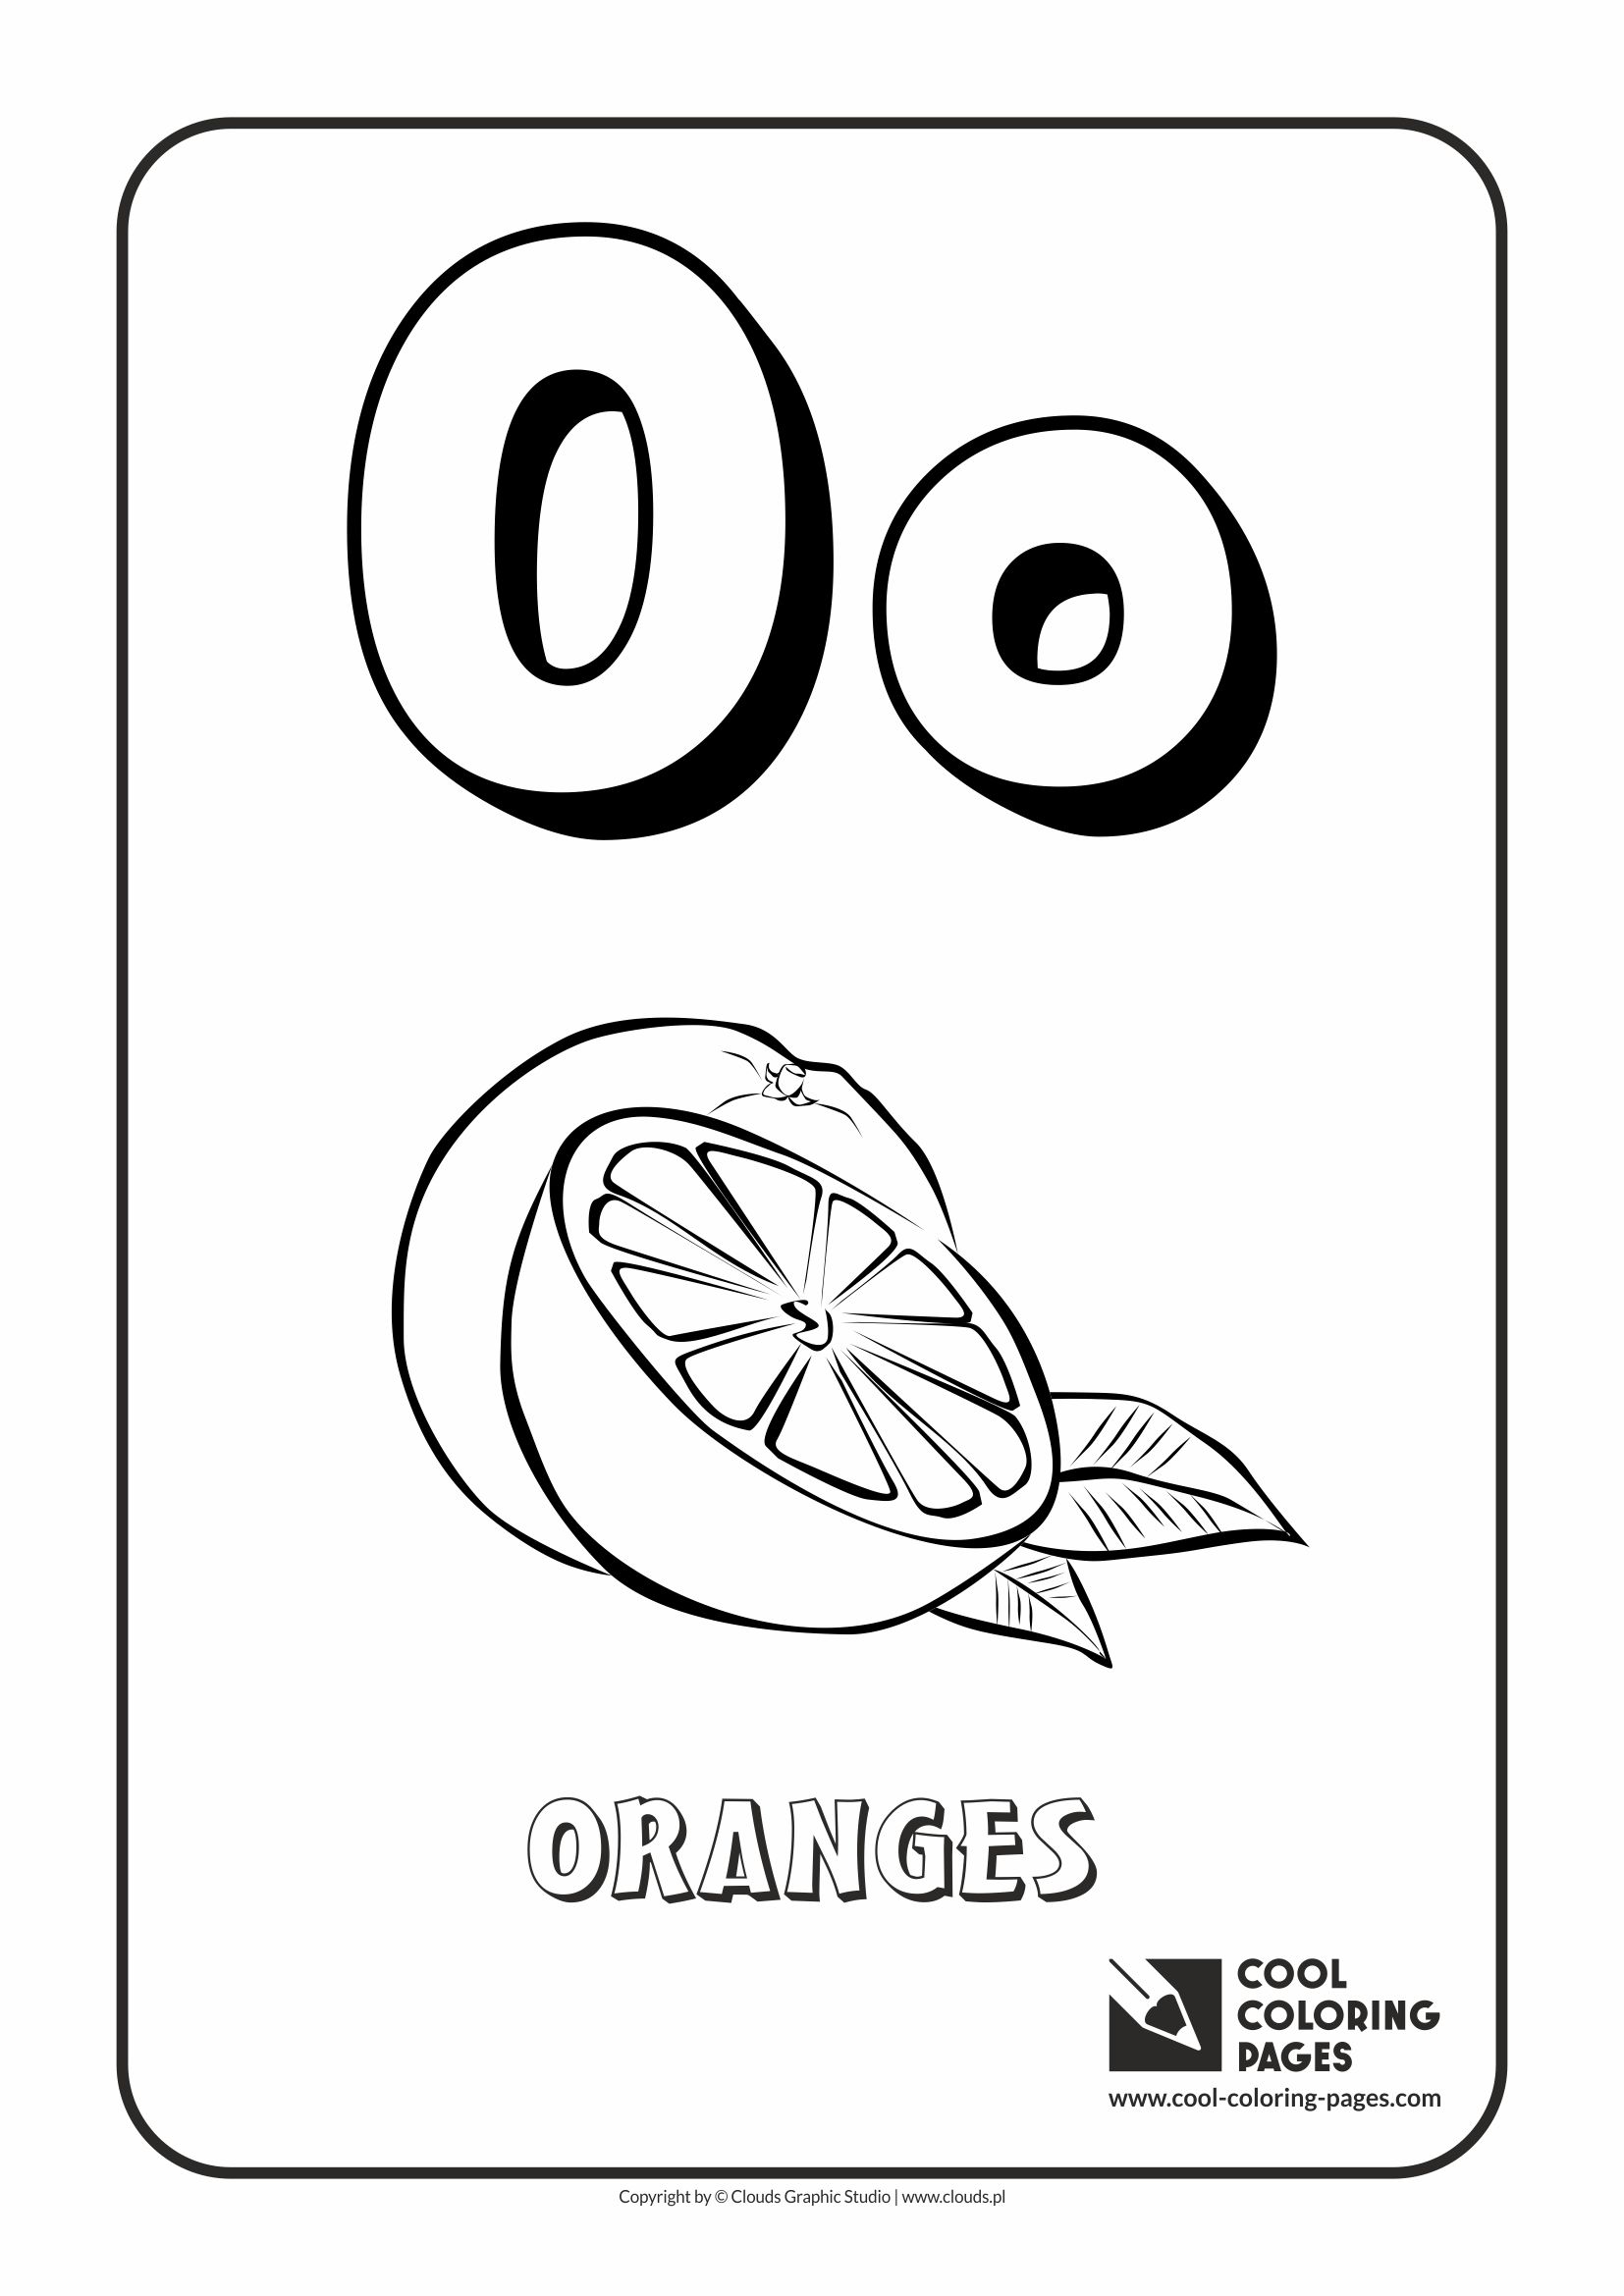 Cool Coloring Pages - Alphabet / Letter O / Coloring page with letter O